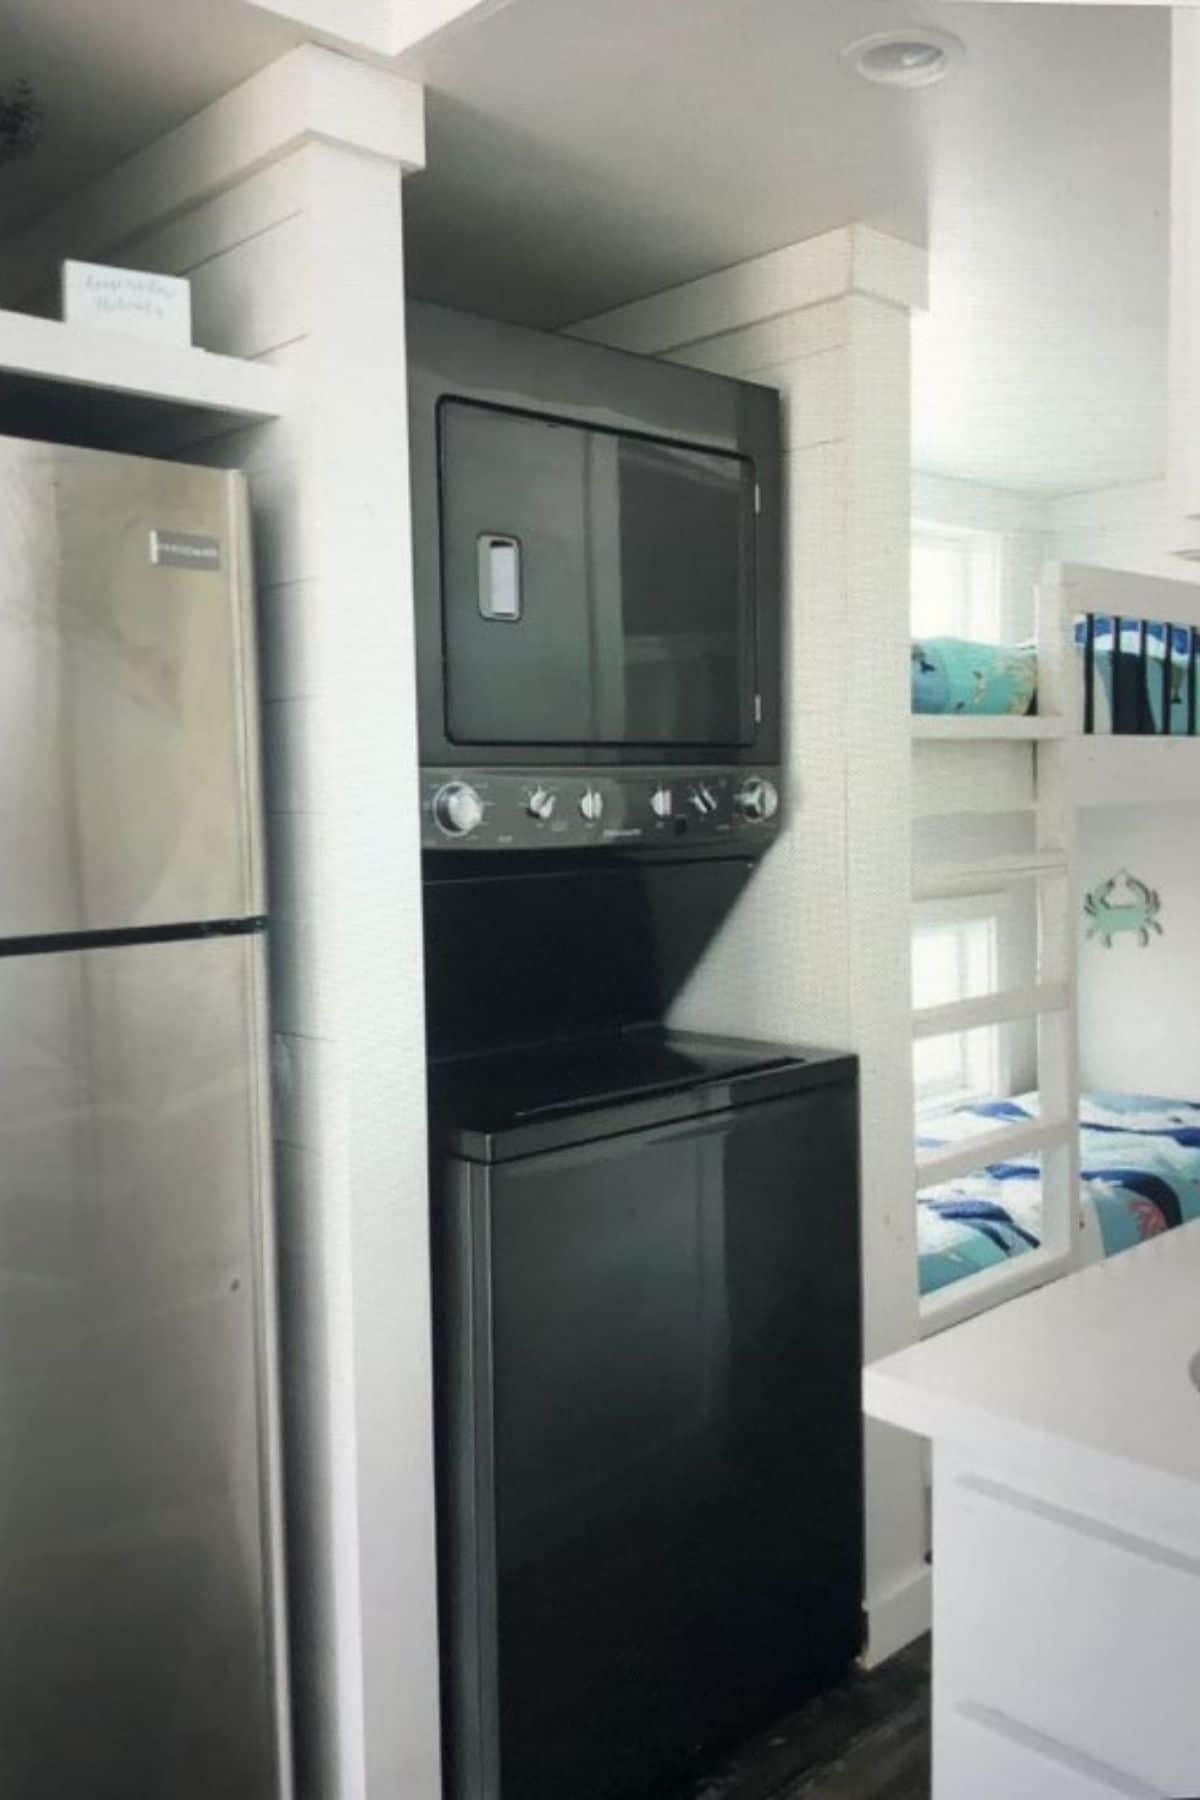 black stacking washer and dryer beside stainless steel refrigerator